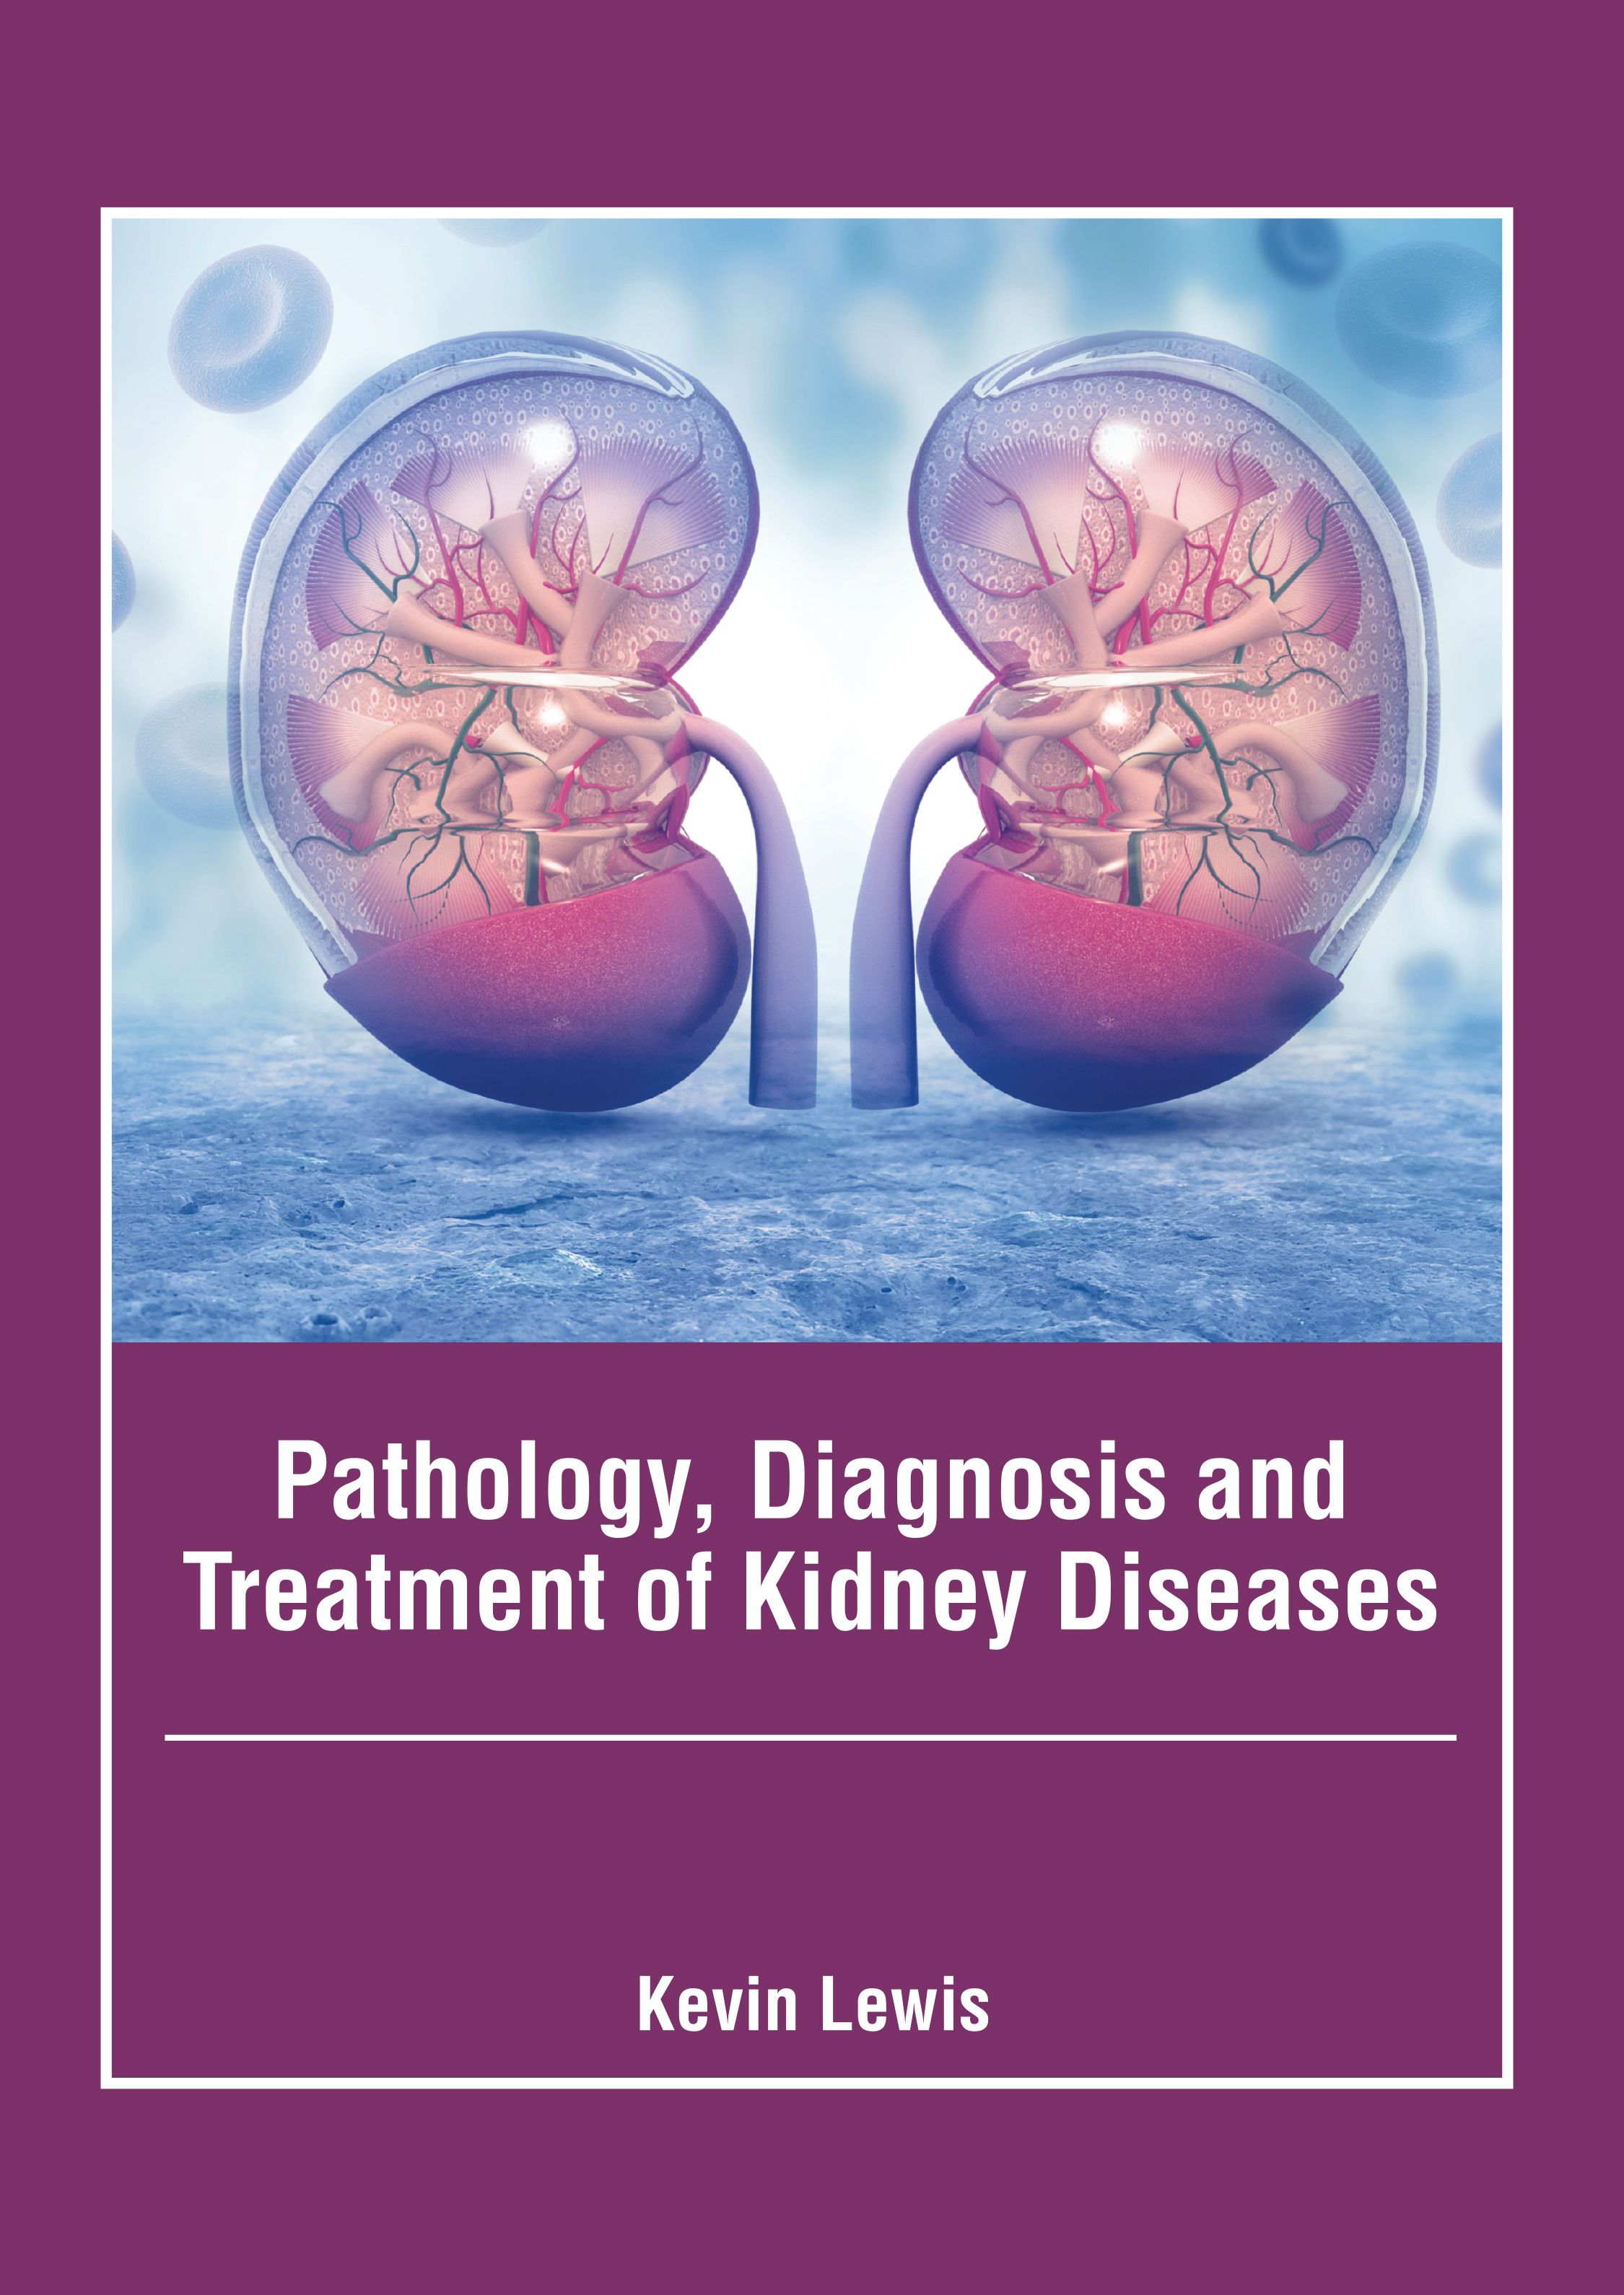 PATHOLOGY, DIAGNOSIS AND TREATMENT OF KIDNEY DISEASES